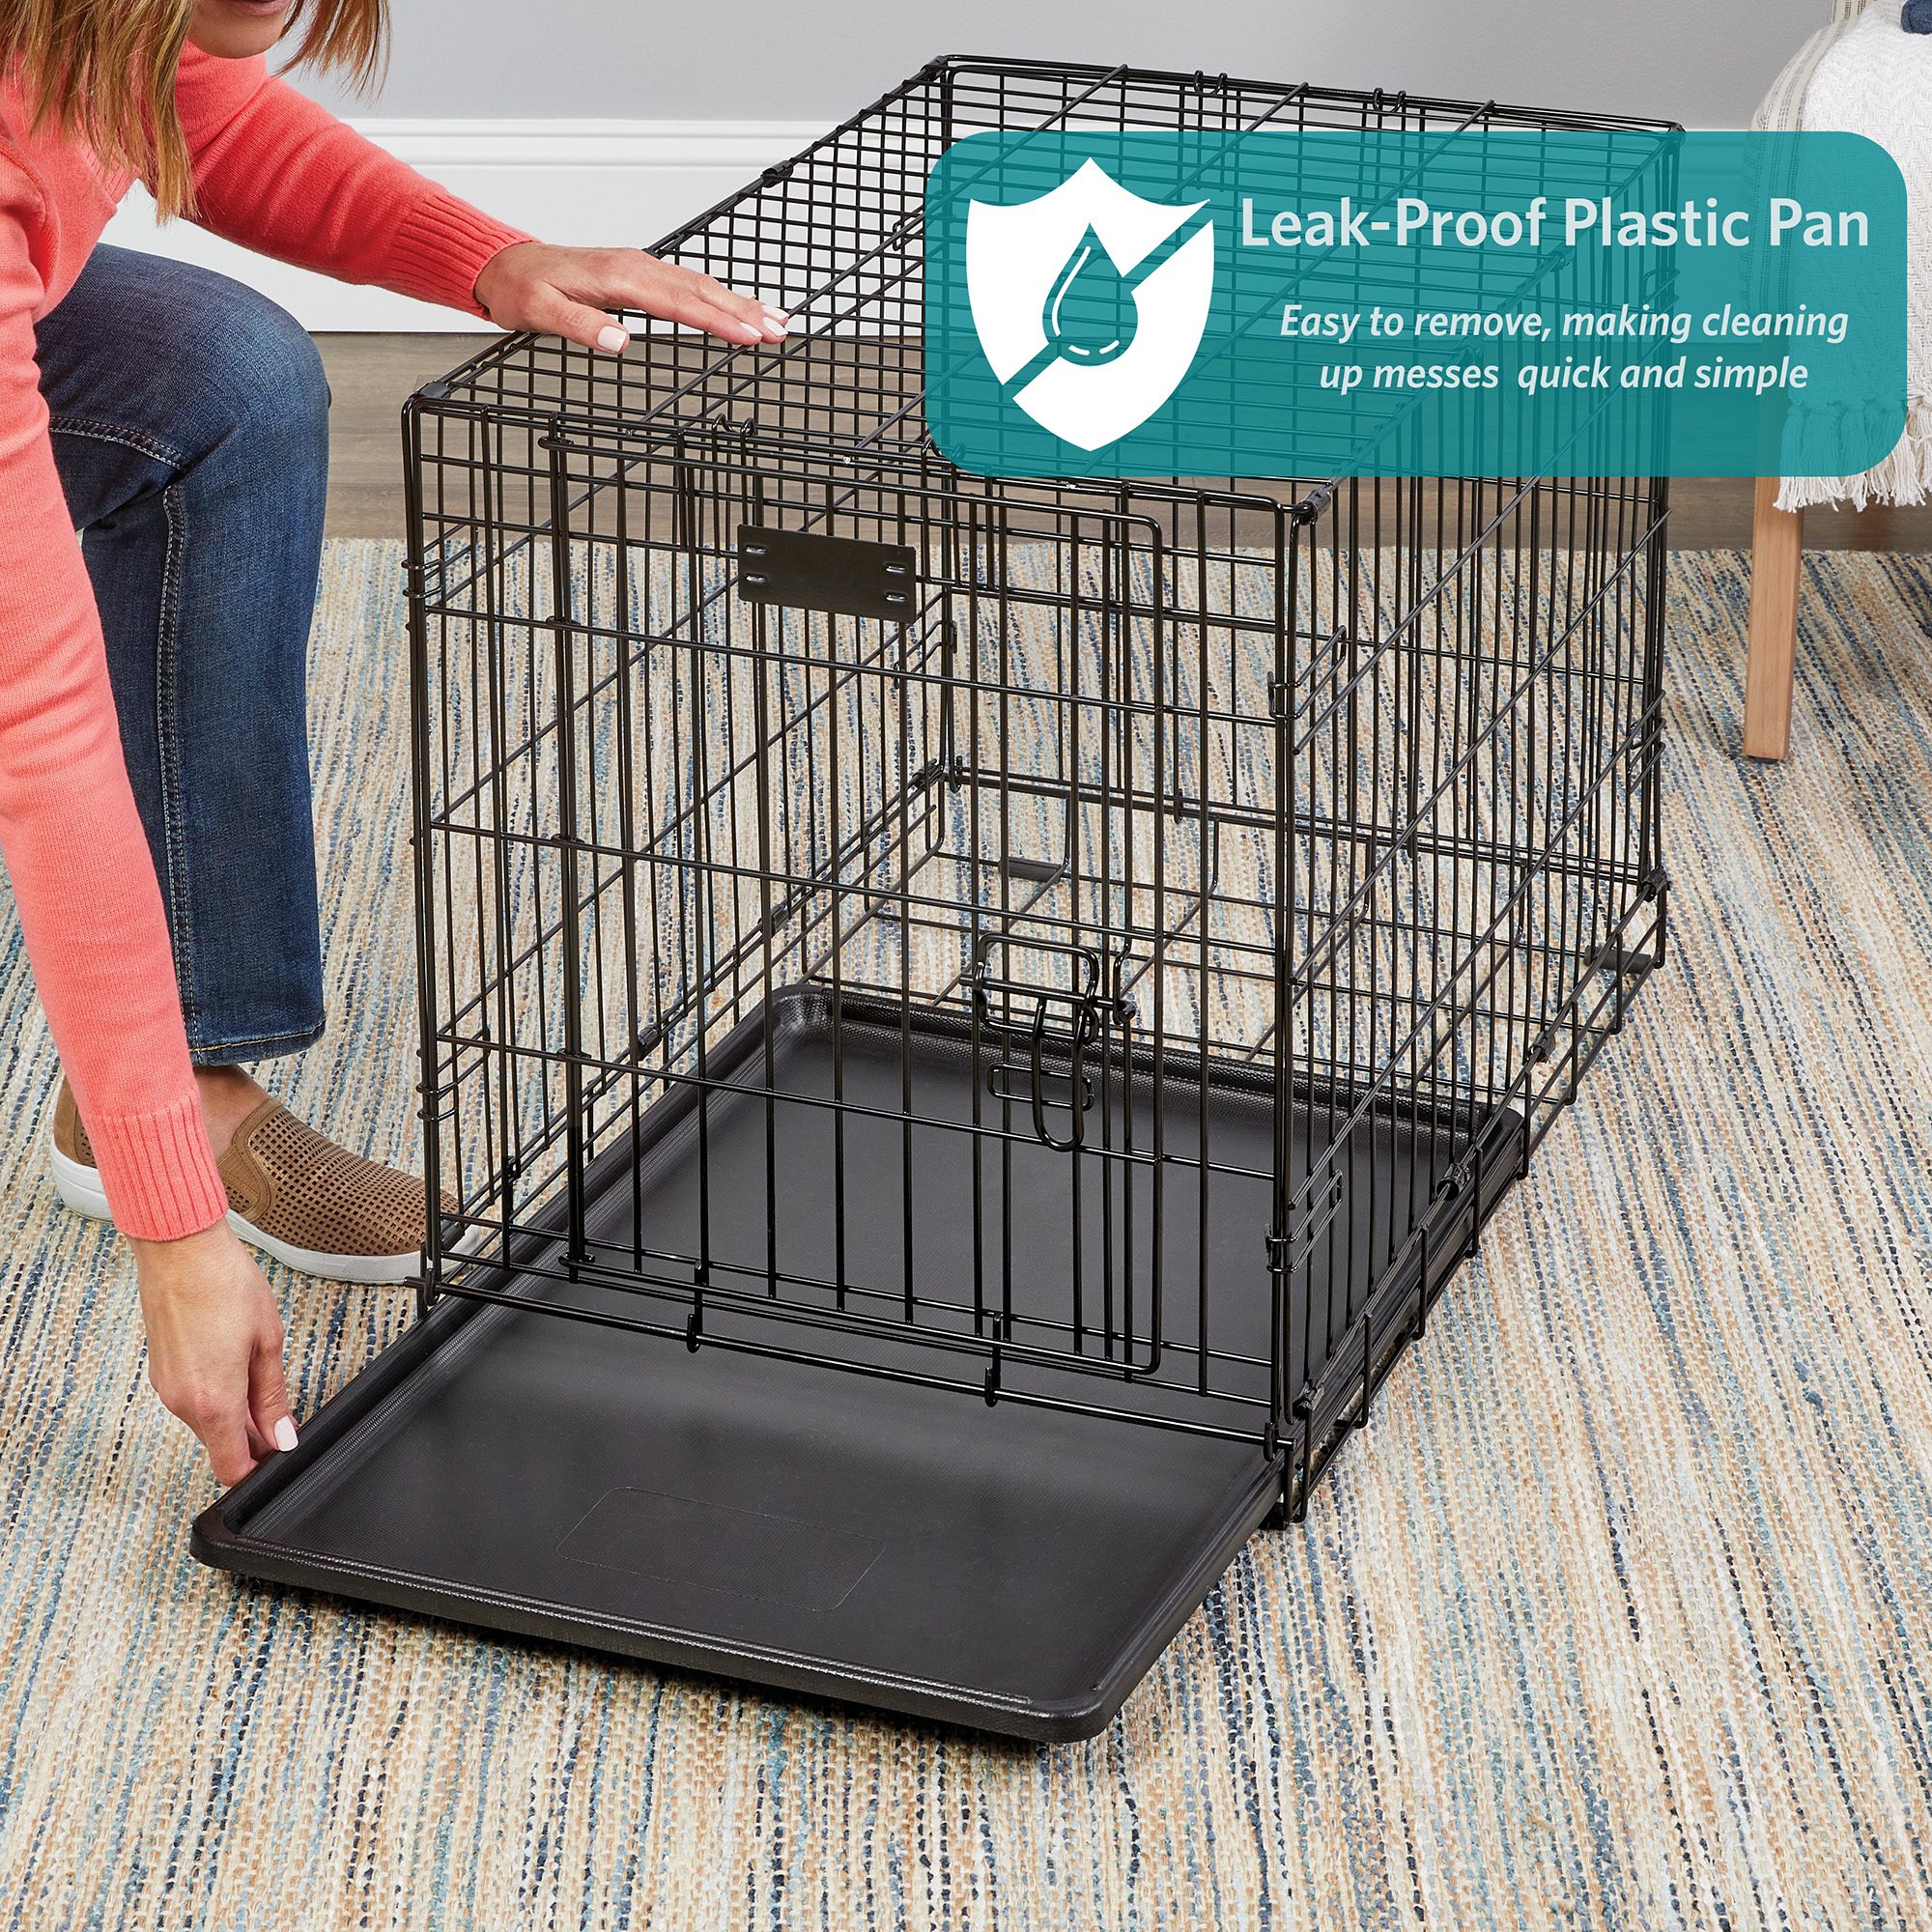 Medium Dog Crate | MidWest iCrate 30" Double Door Folding Metal Dog Crate | Divider Panel, Floor Protecting Feet & Dog Pan | 30L x 19W x 21H Inches, Medium Dog Breed - image 3 of 7